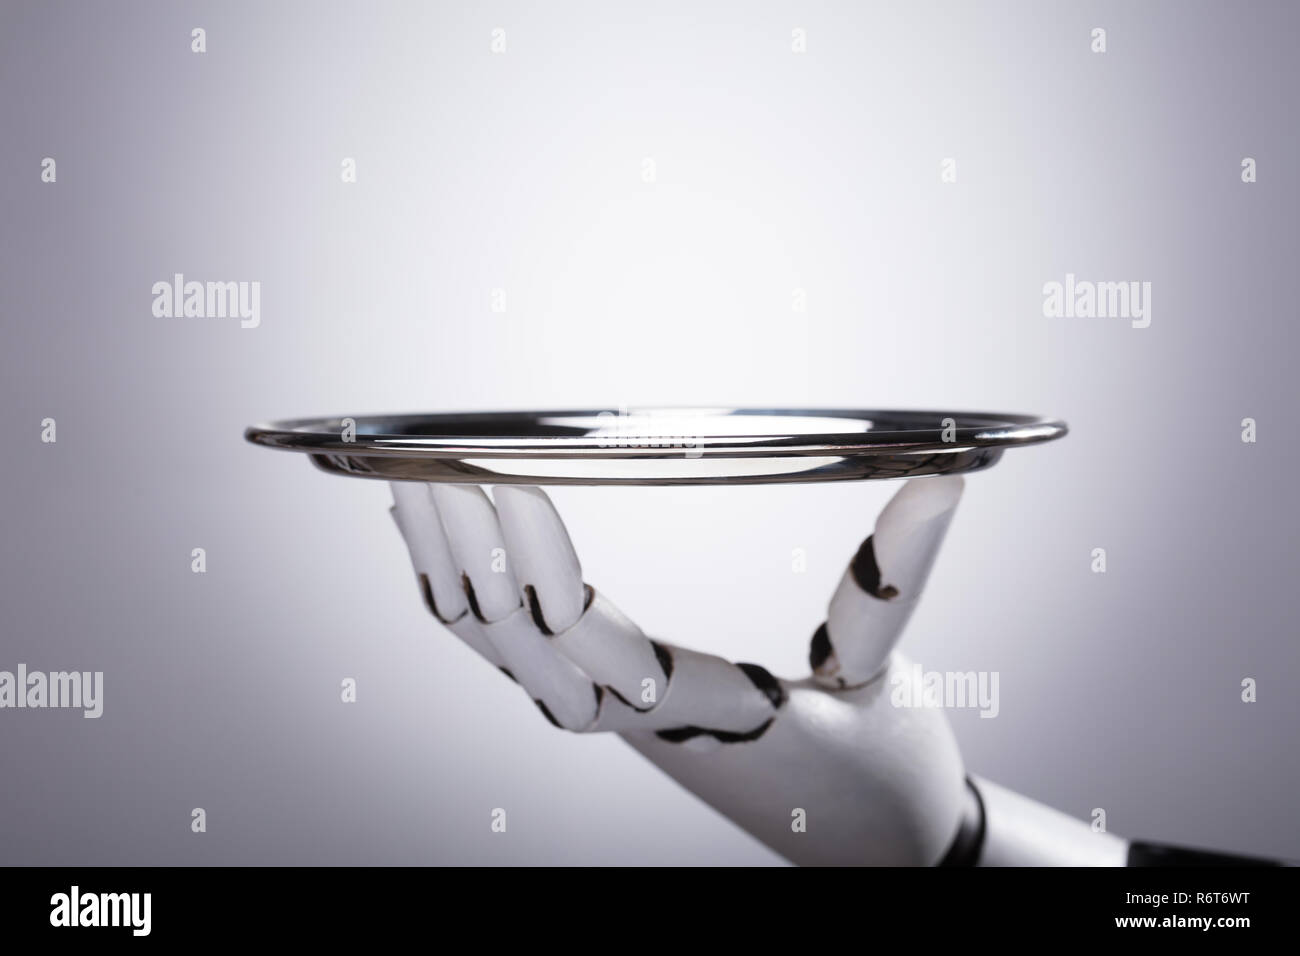 Robot Hand Holding Empty Plate Stock Photo